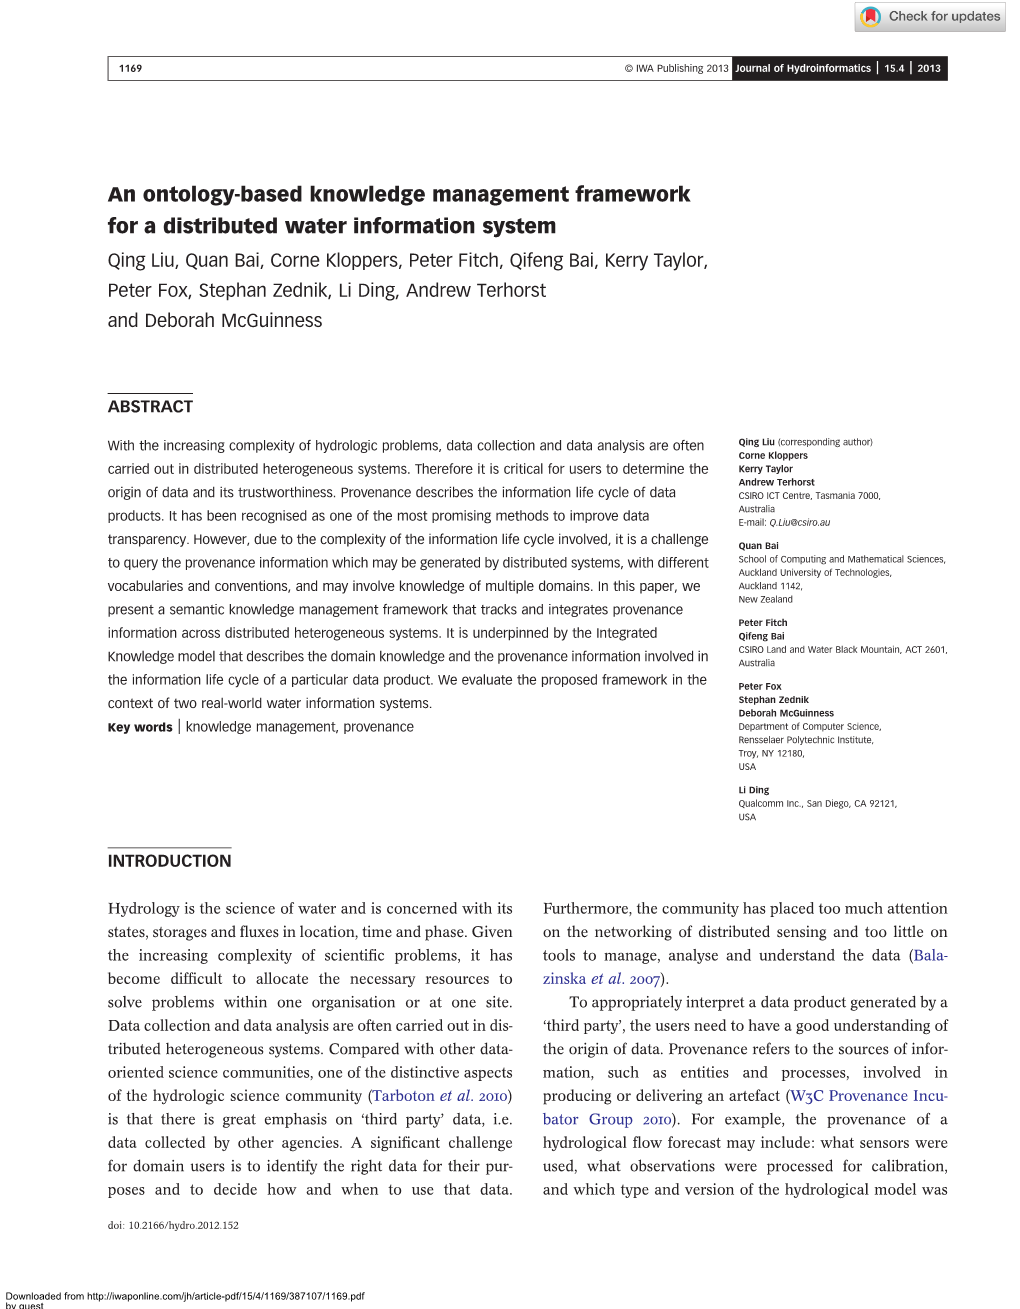 An Ontology-Based Knowledge Management Framework for a Distributed Water Information System